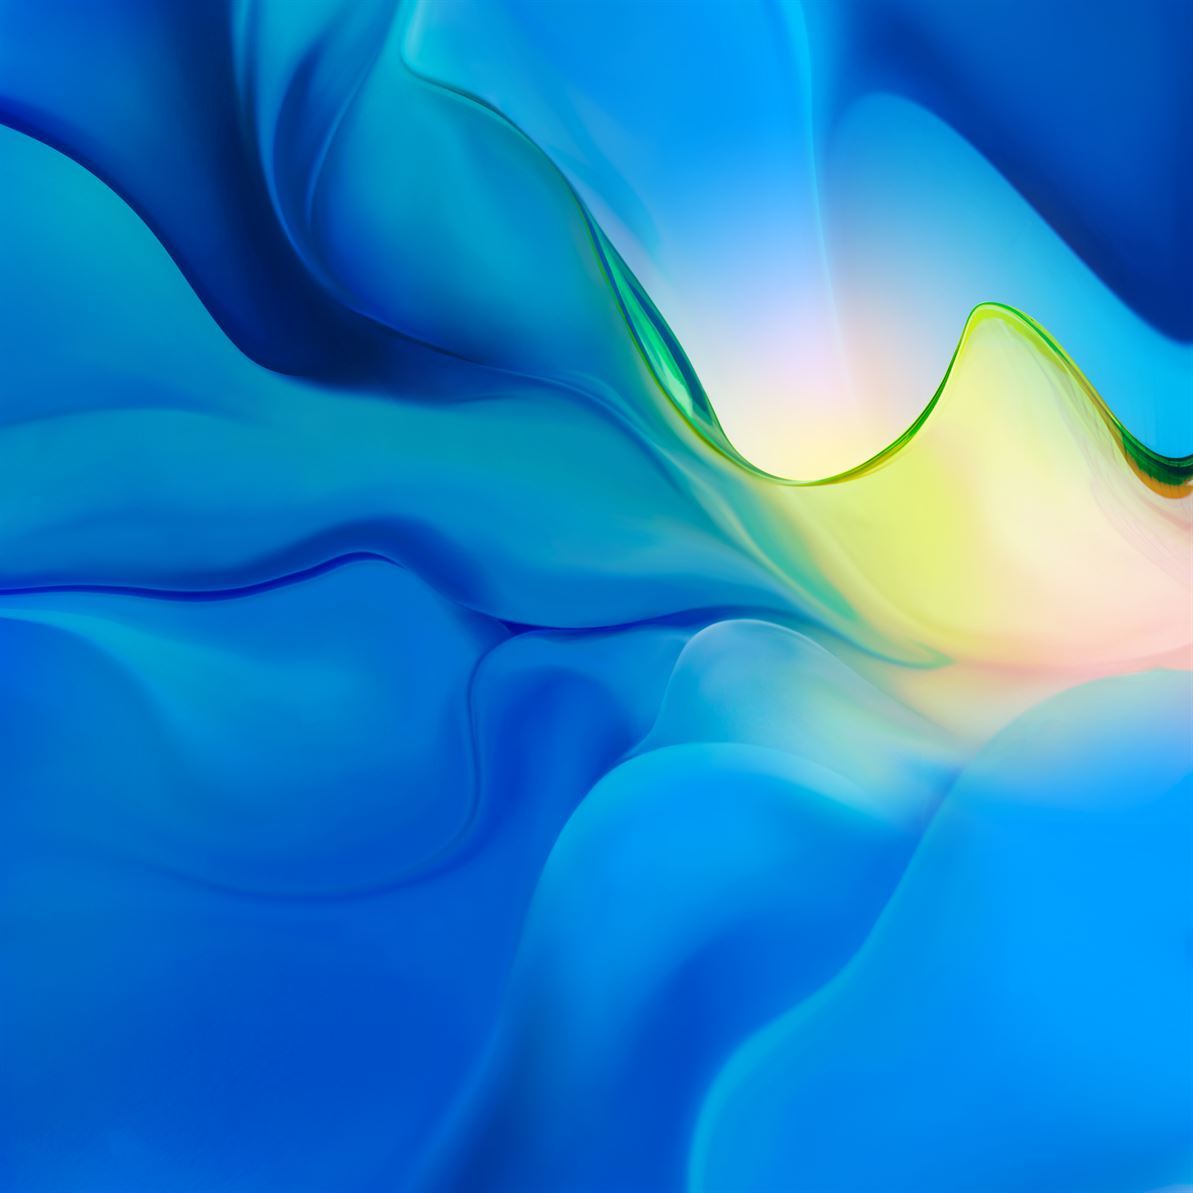 The Huawei P30 S Wallpaper And Emui Themes